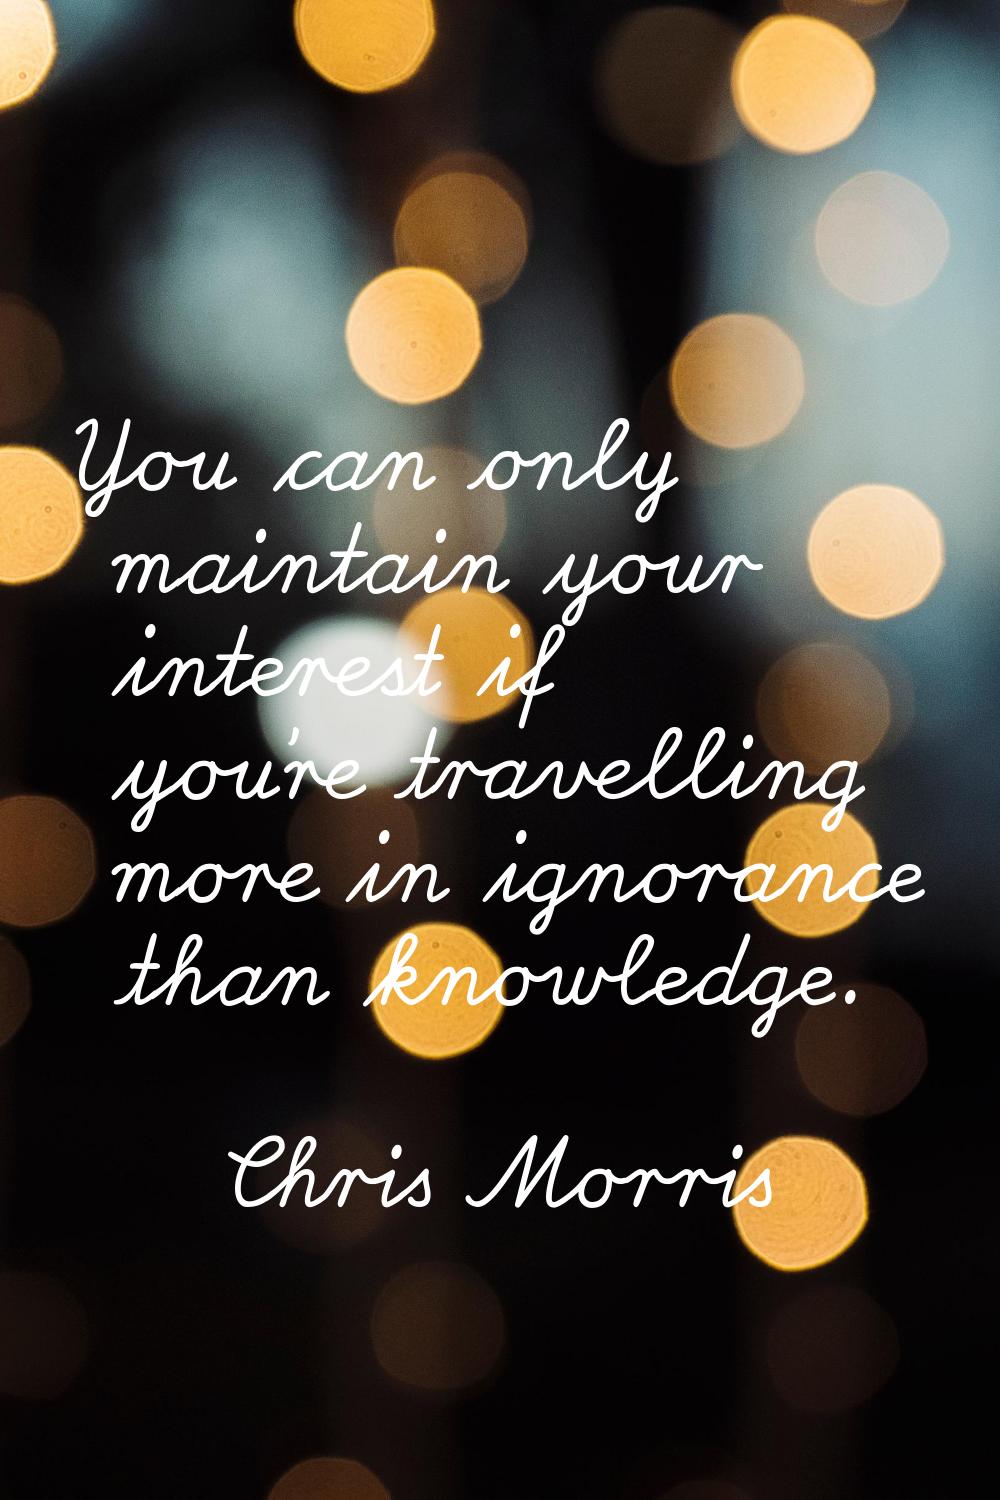 You can only maintain your interest if you're travelling more in ignorance than knowledge.